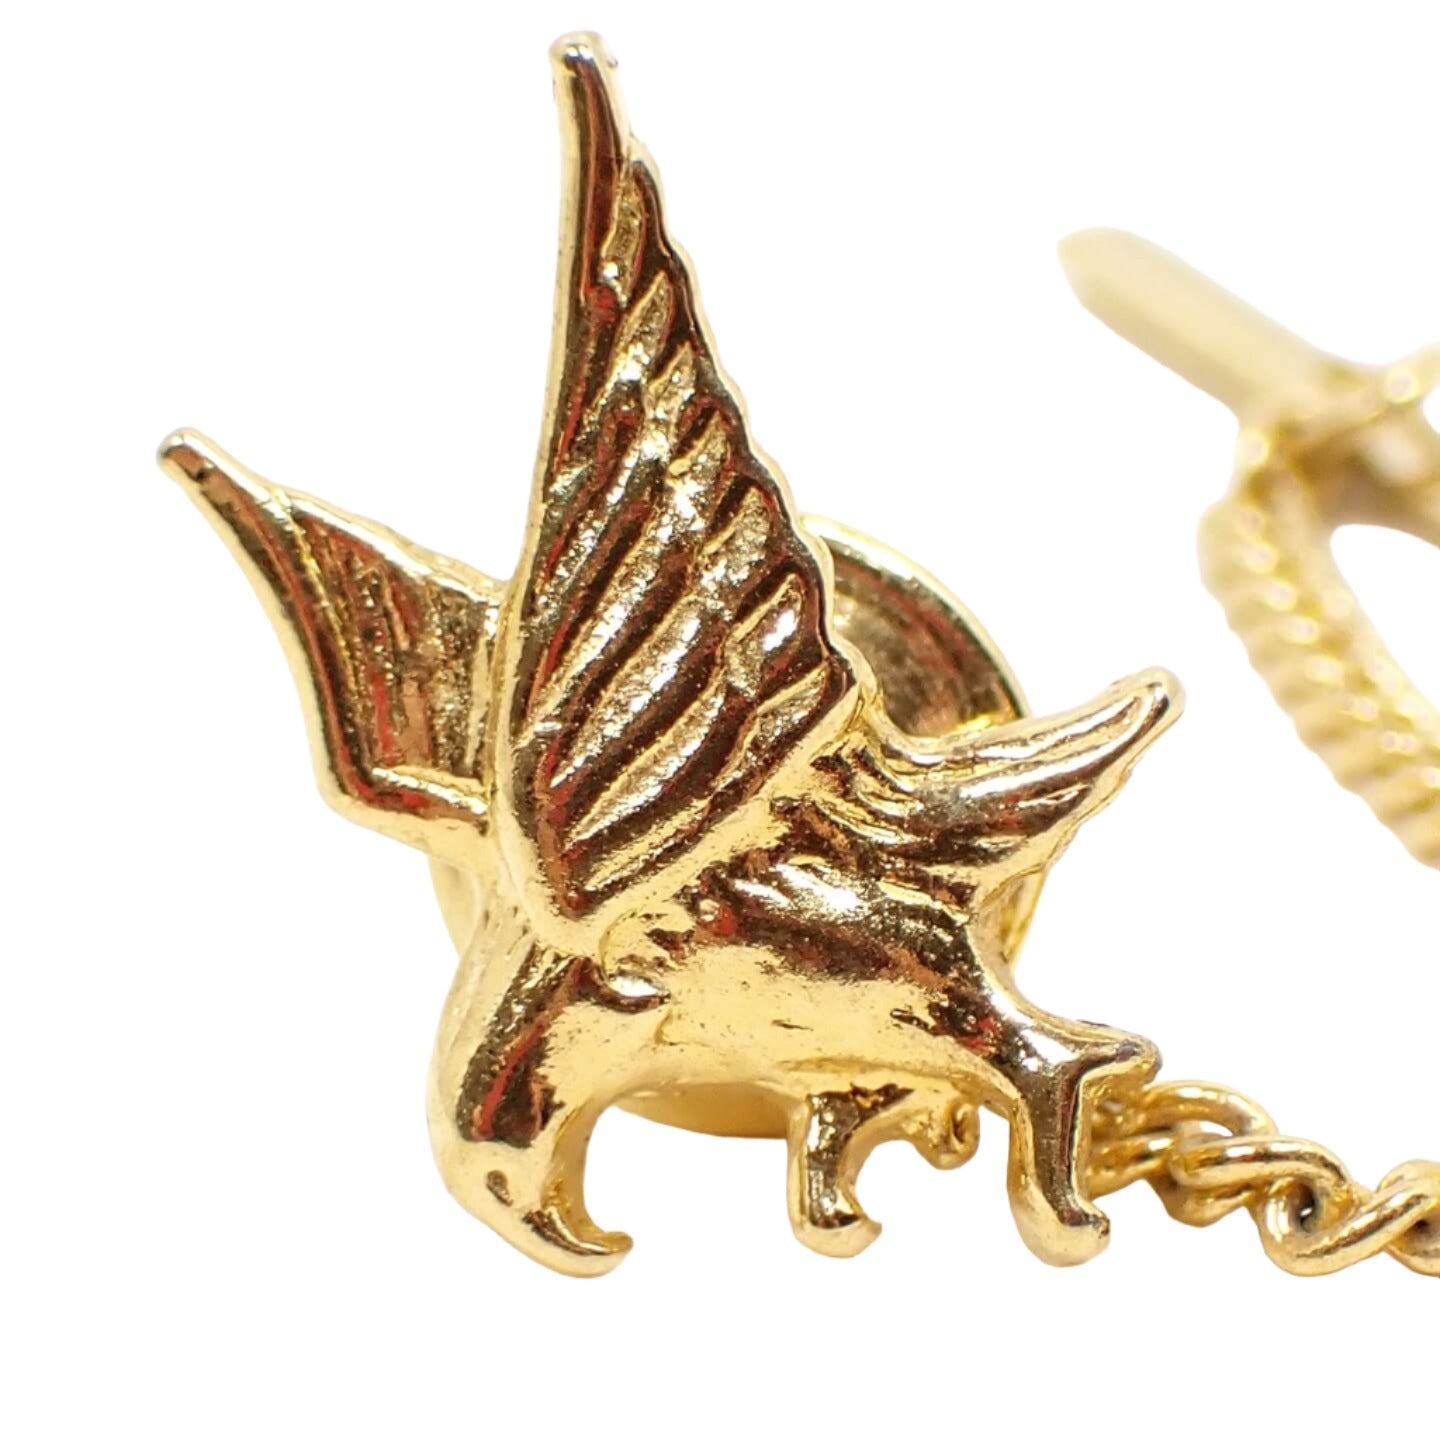 Enlarged front view of the retro vintage eagle tie tack. The metal is gold tone plated in color. The tie tack is shaped like a flying eagle with its sings out and talons spread to grab something or land.